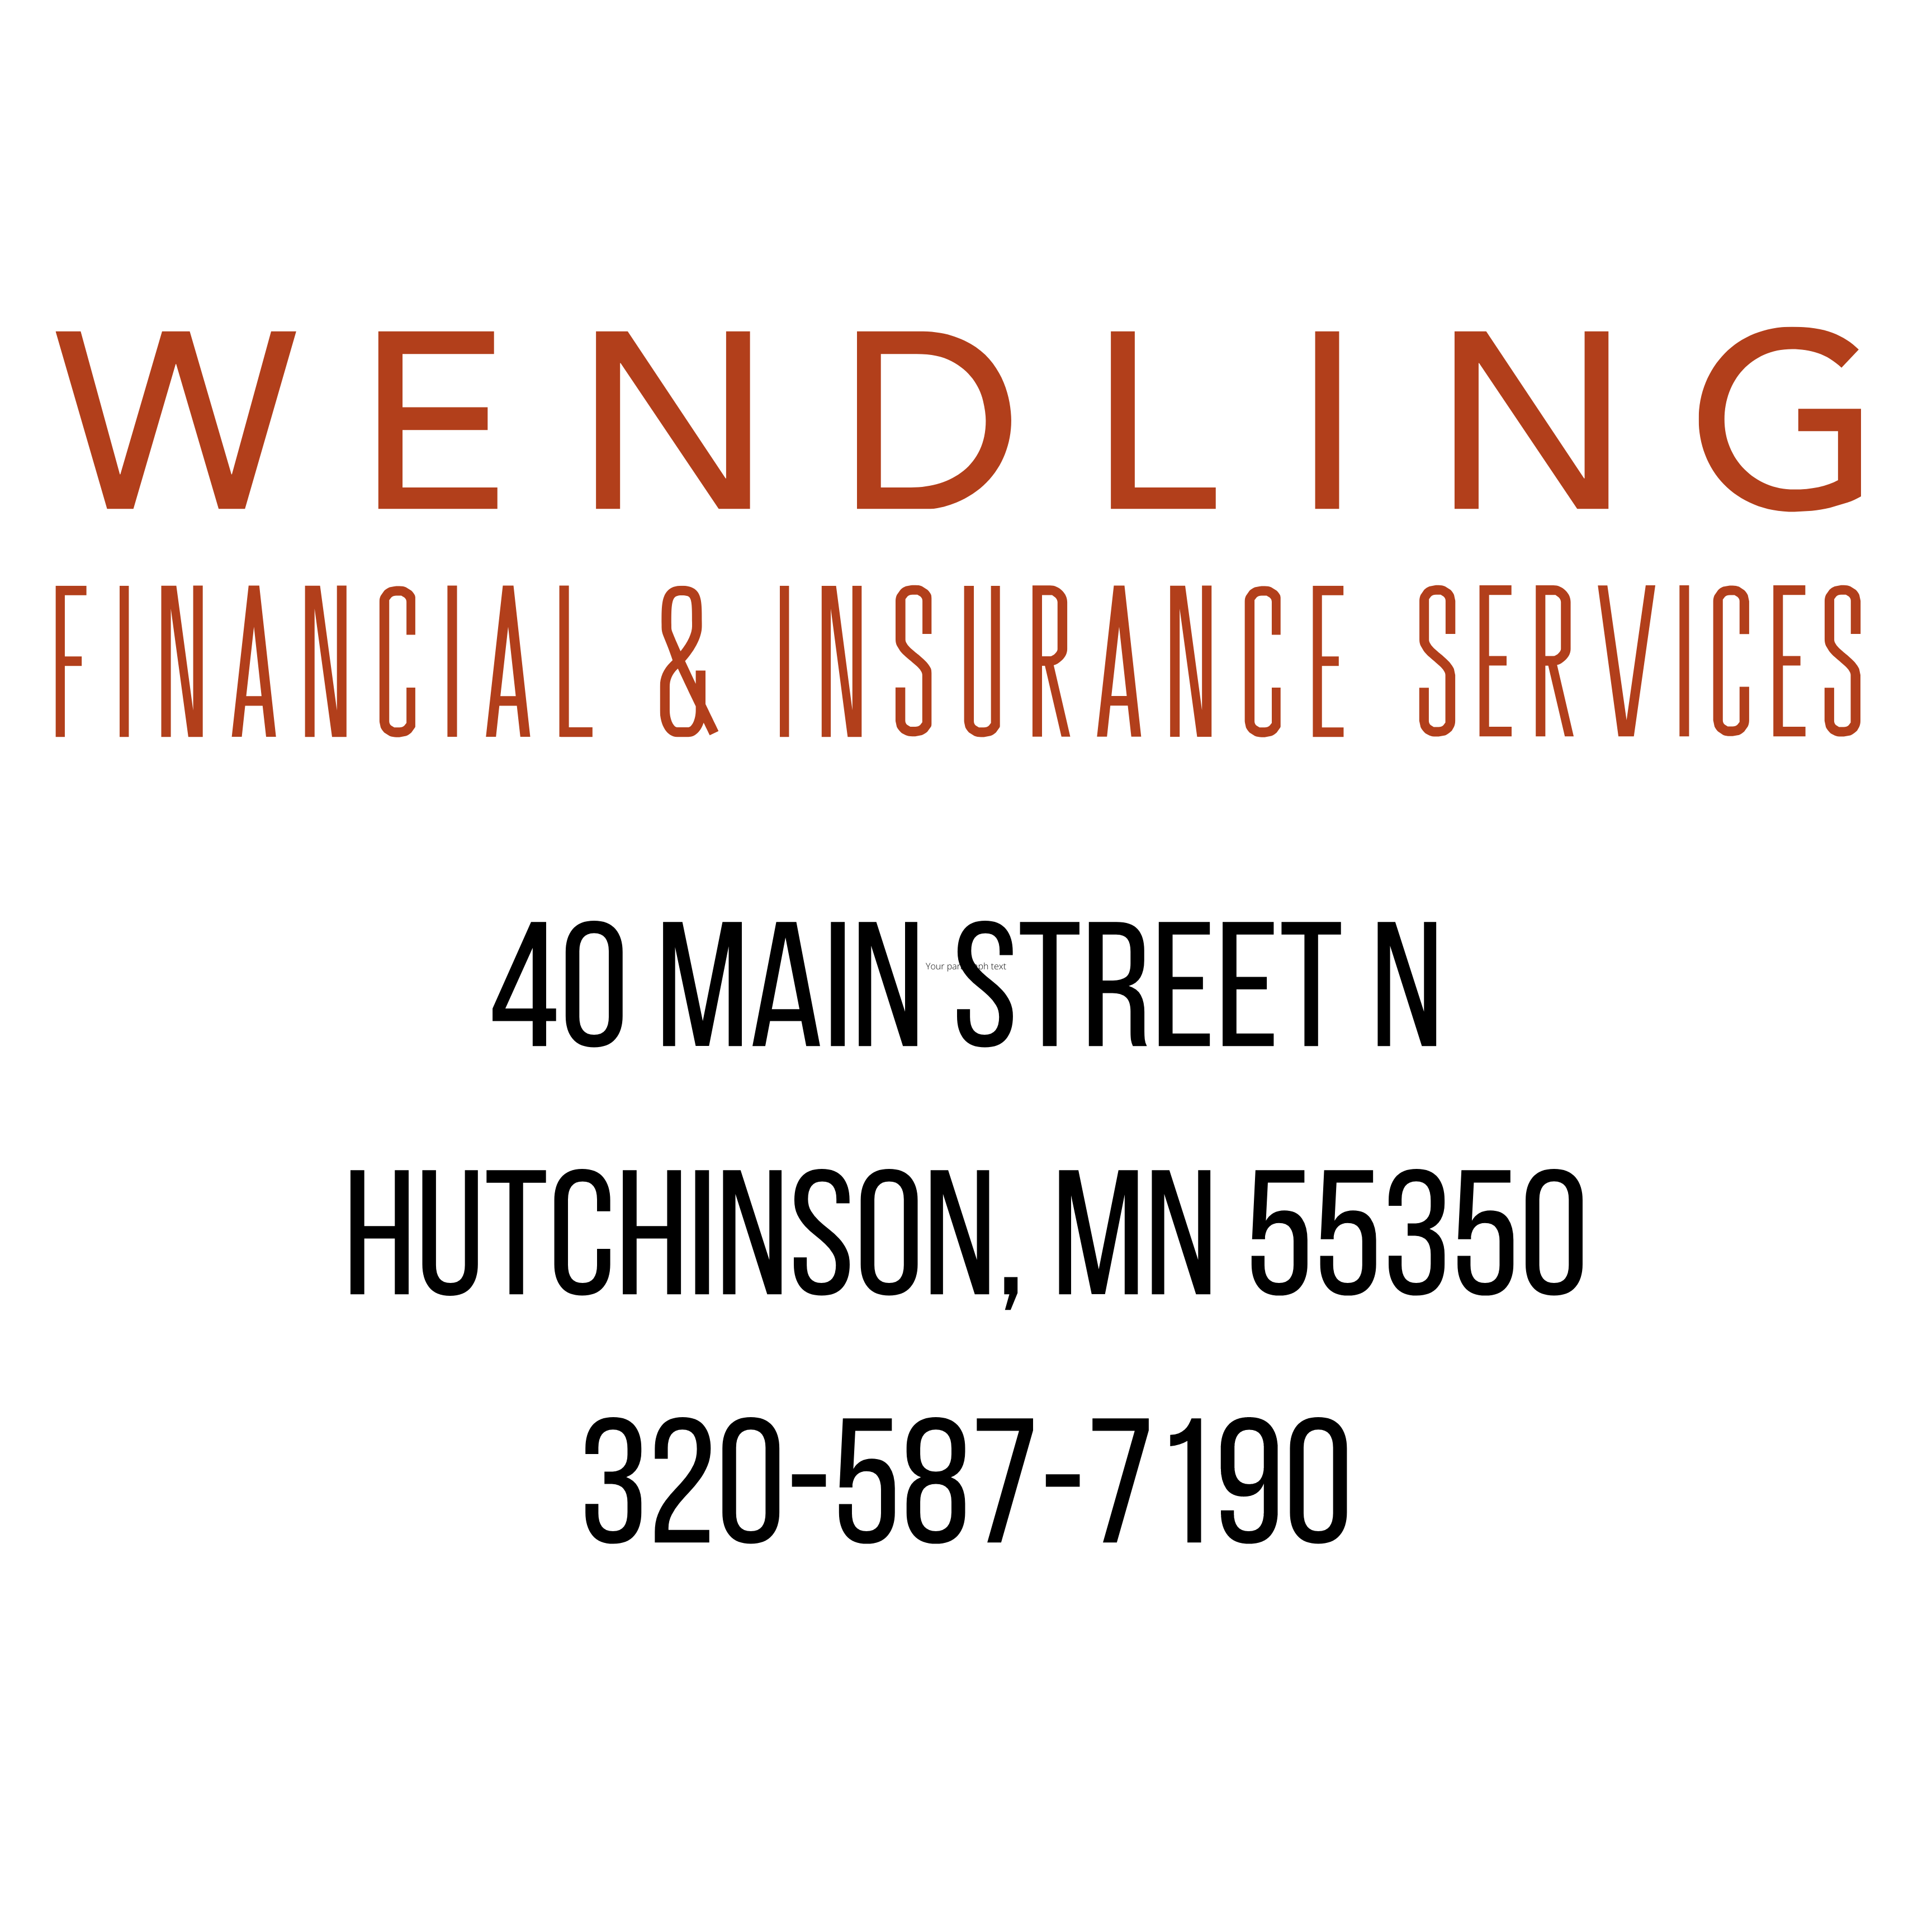 Wendling Financial & Insurance Services